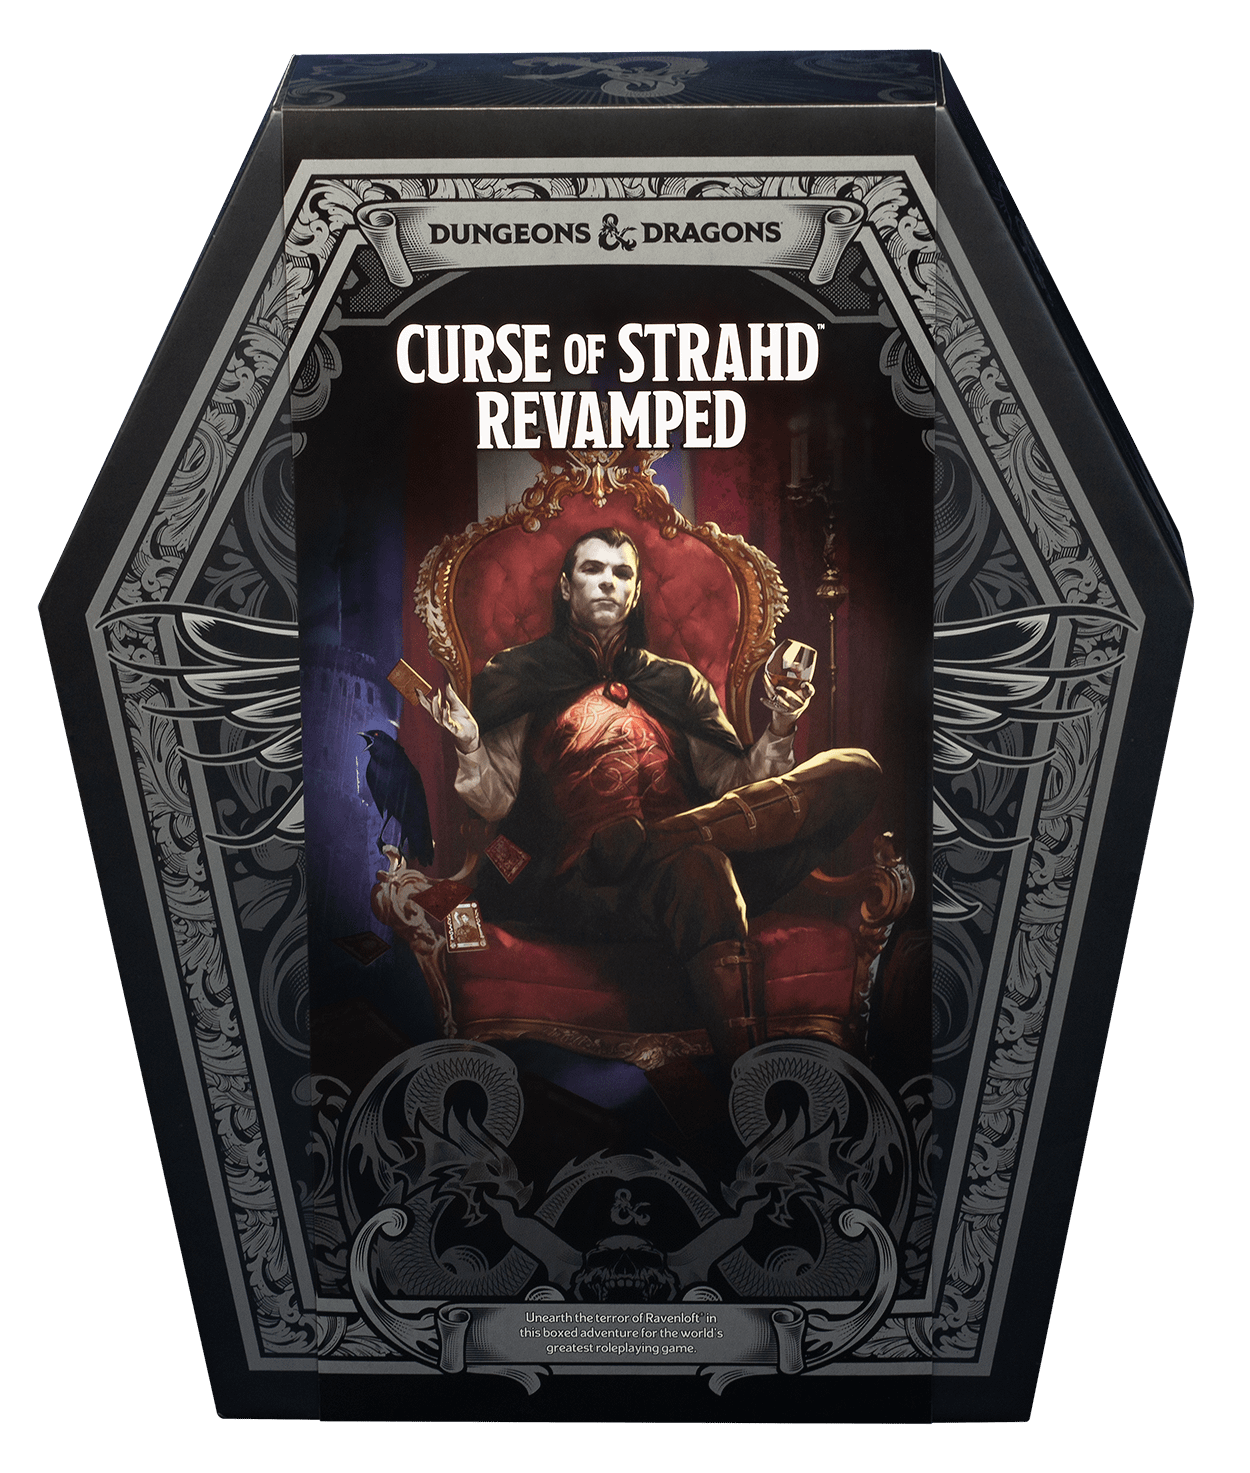 Deleted Images From the New D&D Adventure, Curse of Strahd - IGN